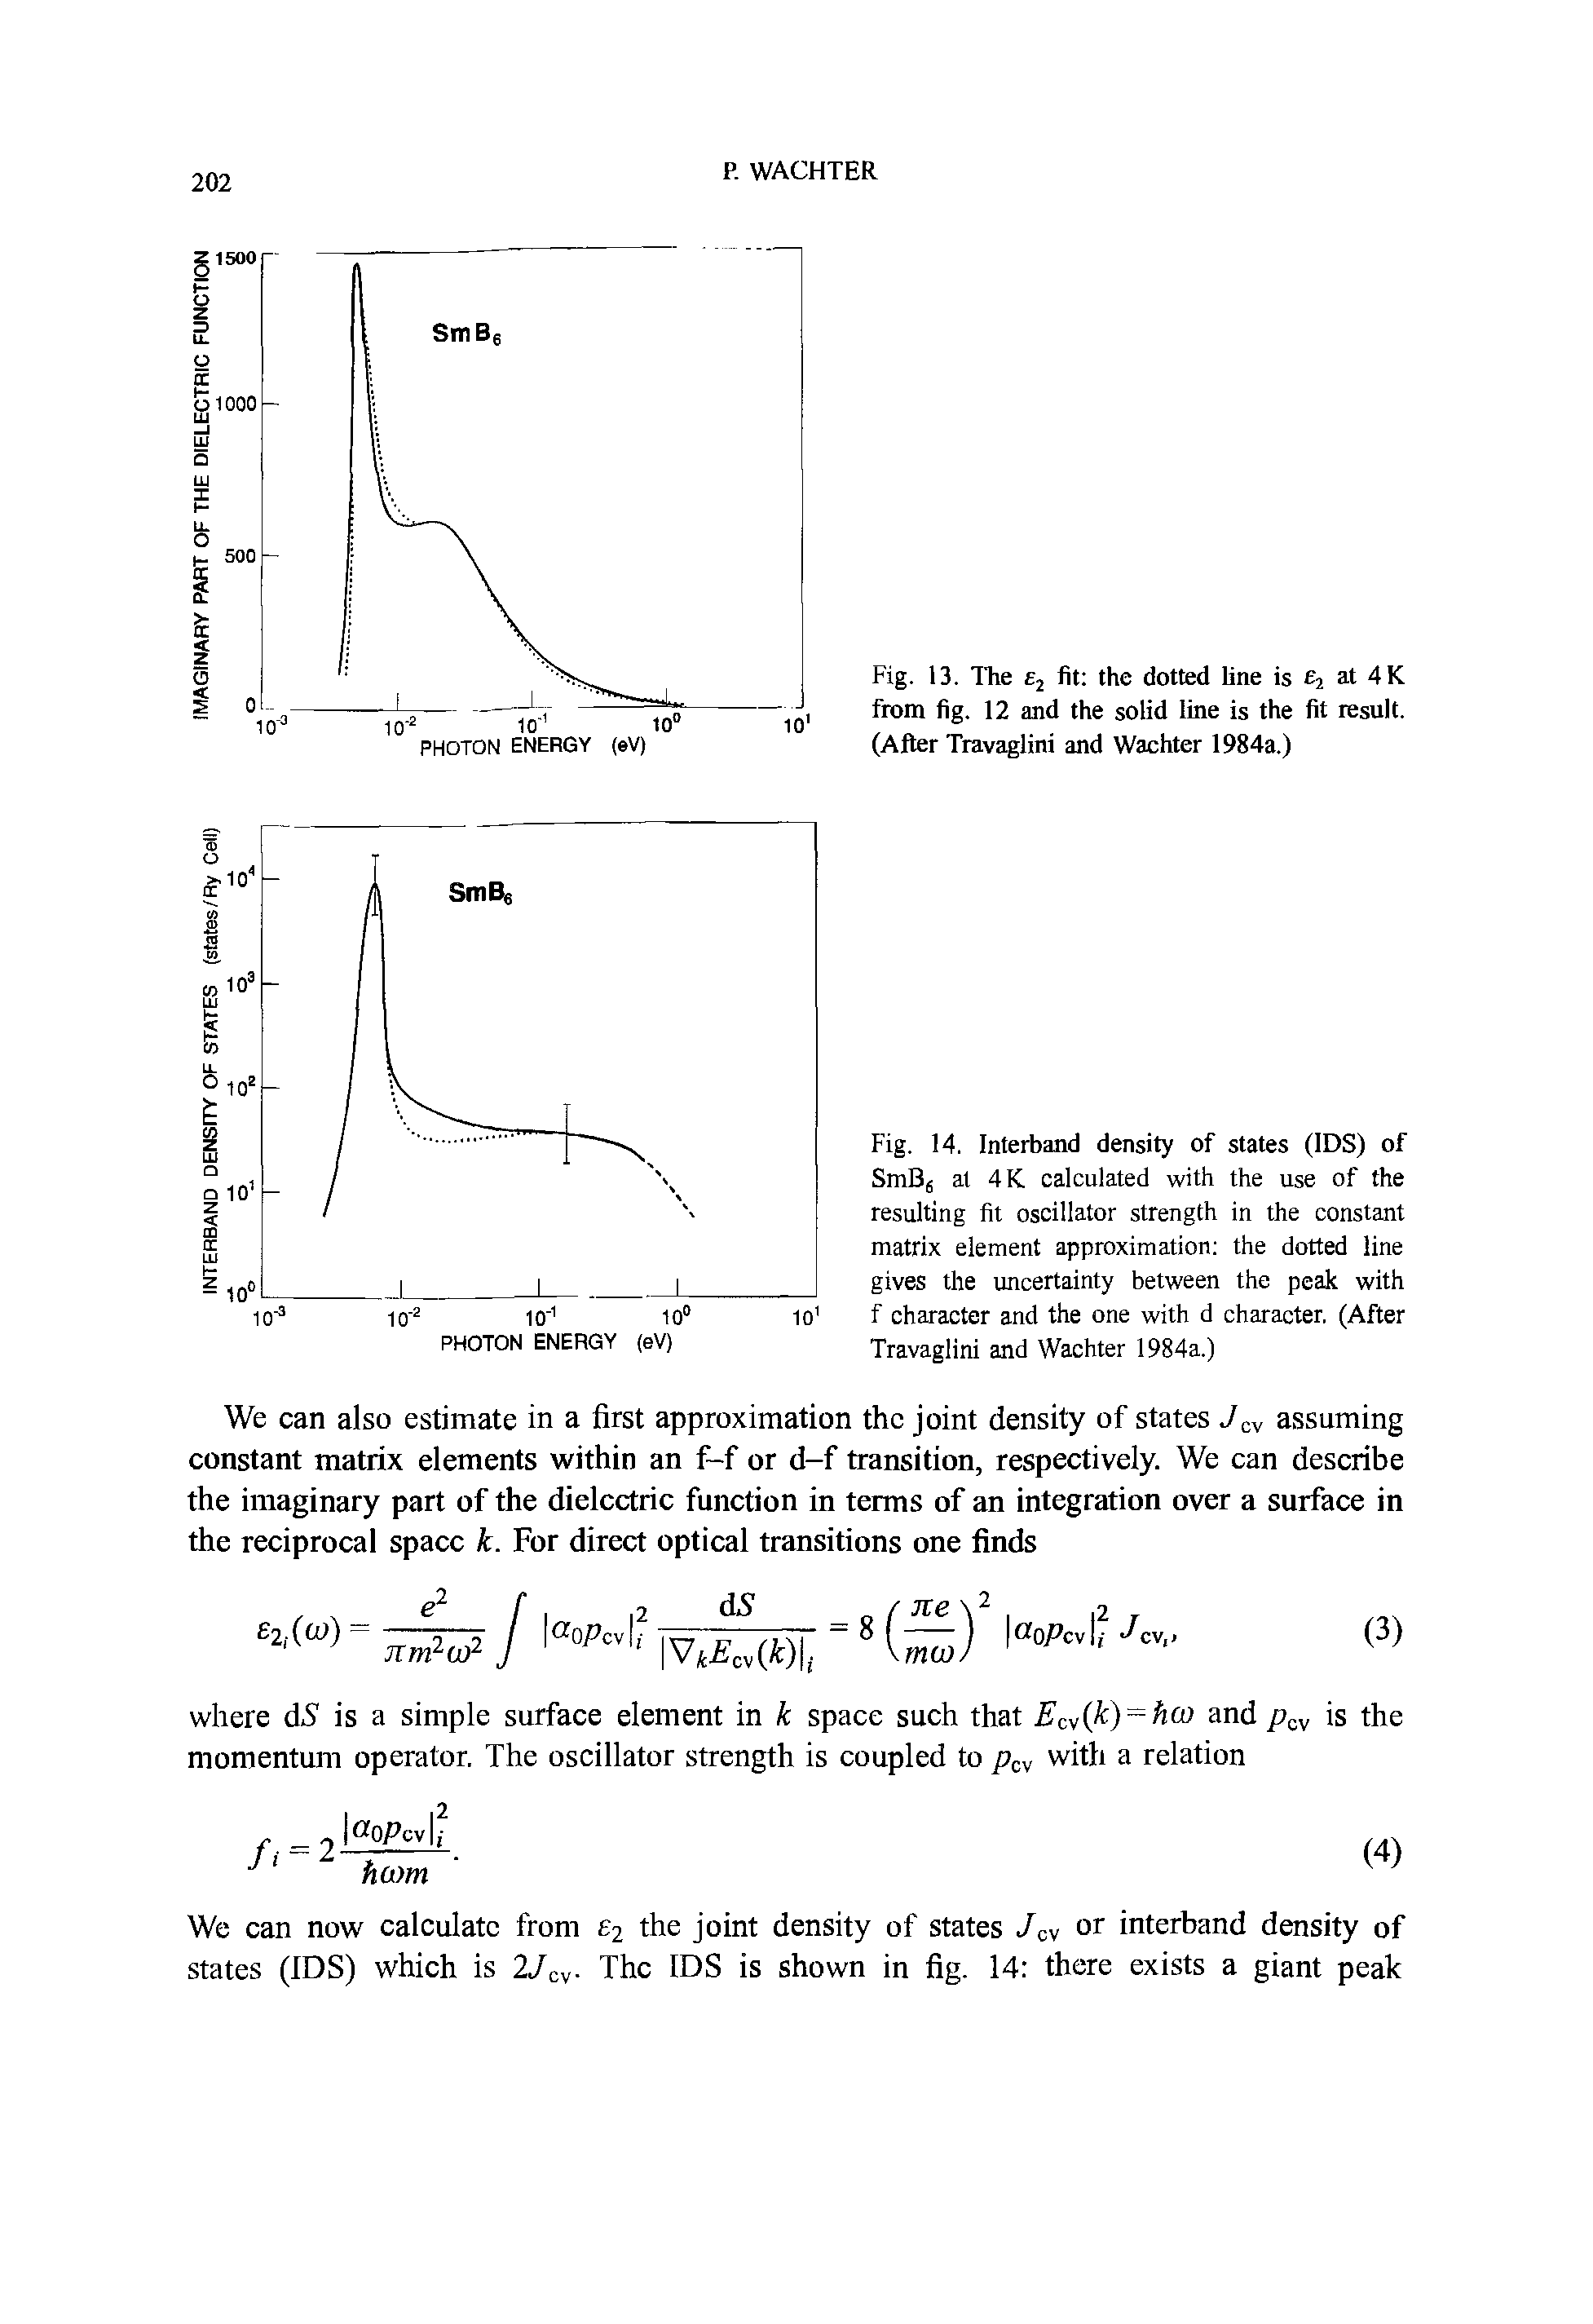 Fig. 14. Interband density of states (IDS) of SmBj al 4K. calculated with the use of the resulting fit oscillator strength in the constant matrix element approximation the dotted line gives the uncertainty between the peak with f character and the one with d character. (After Travaglini and Wachter 1984a.)...